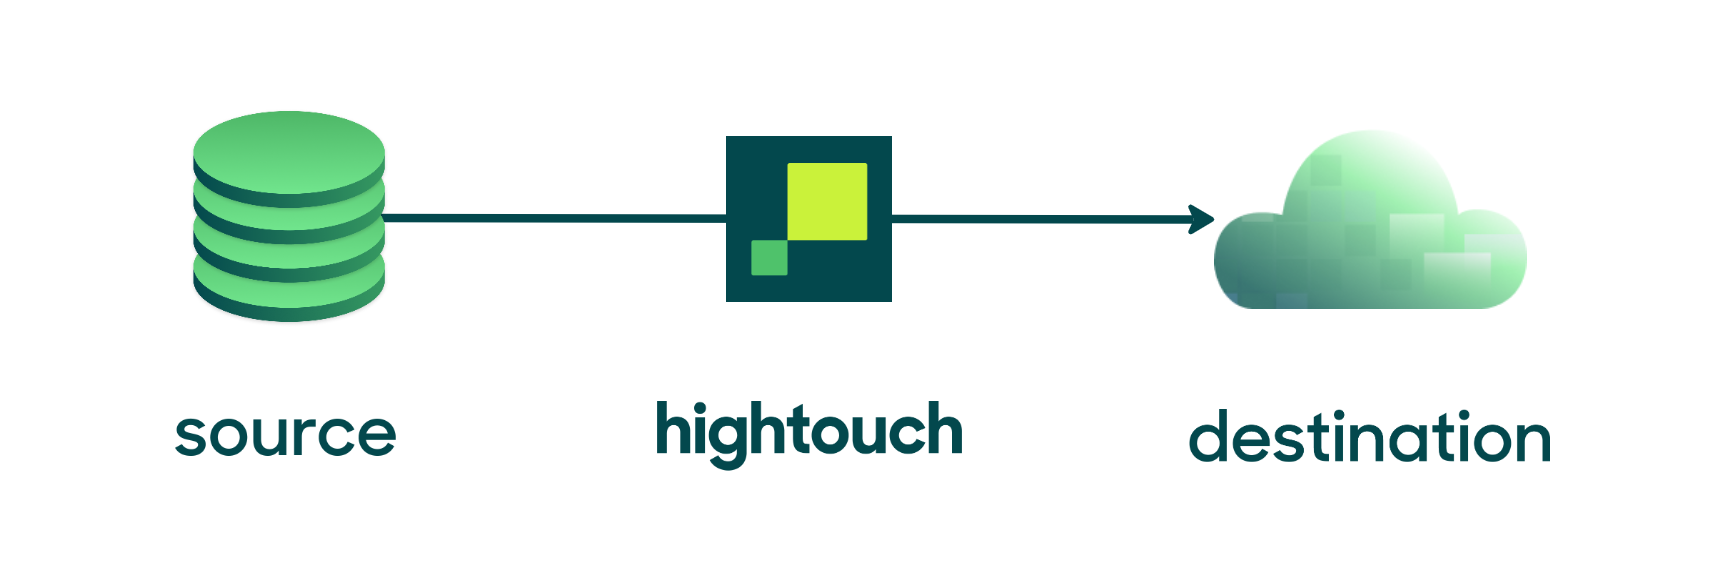 Hightouch syncs data from sources to destinations